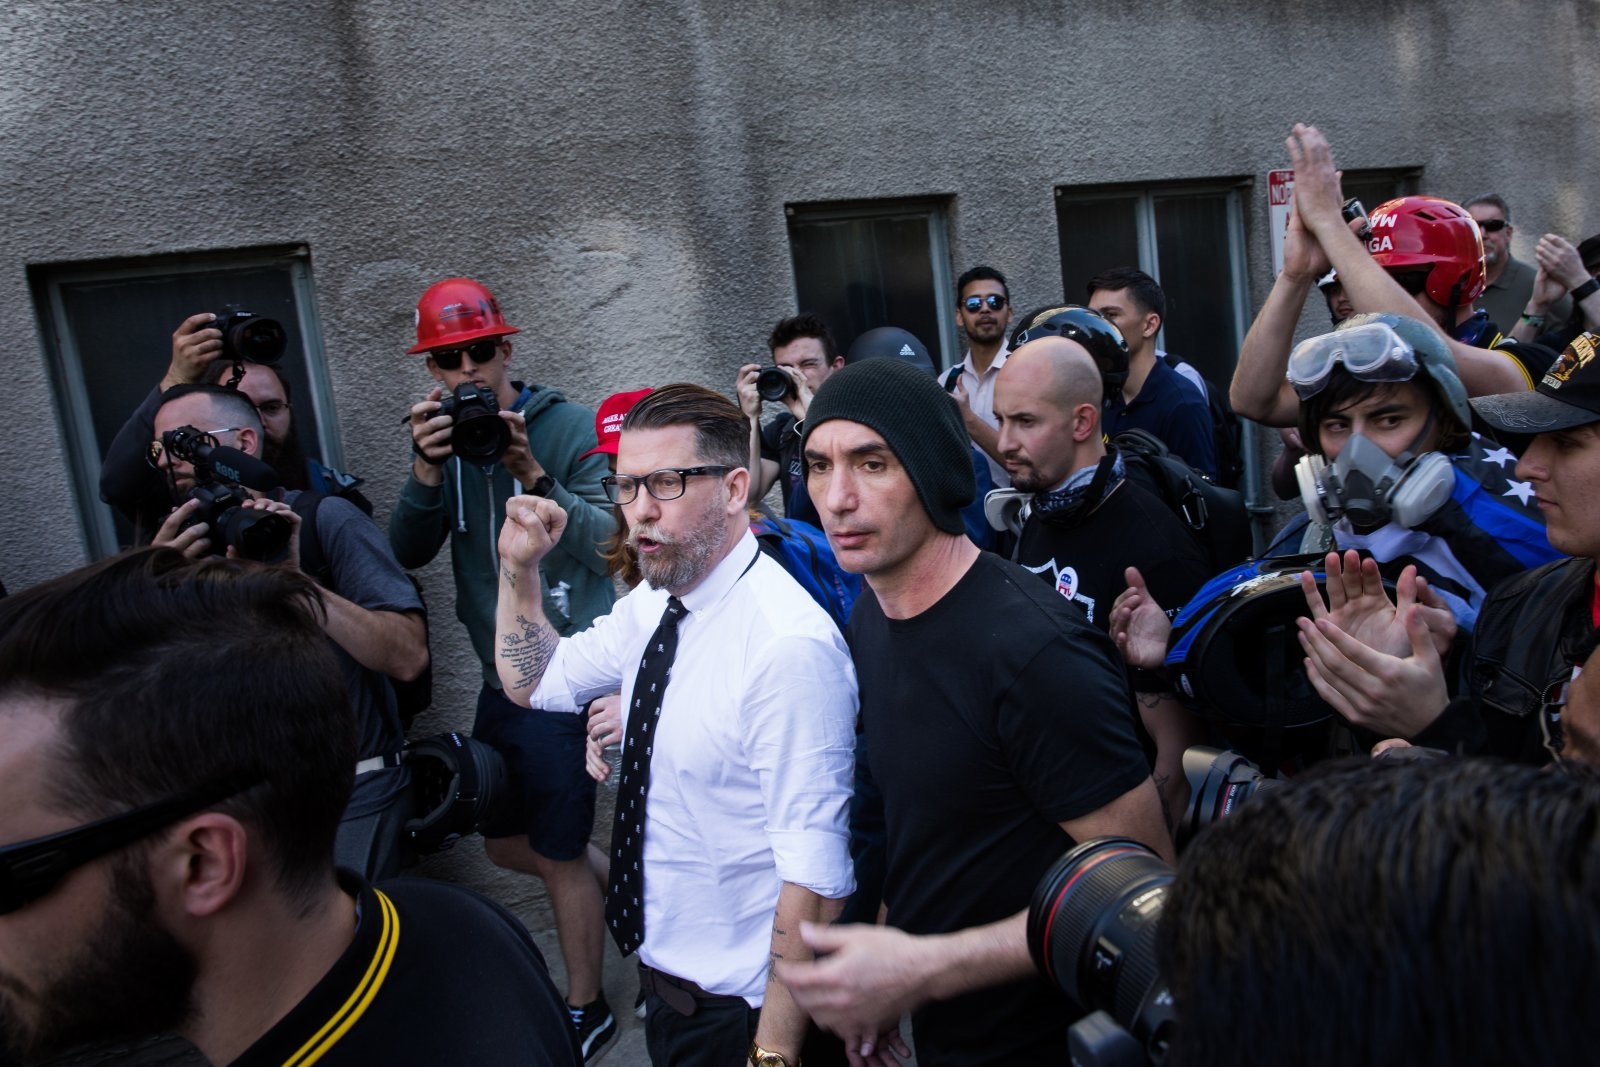 YouTube bans the founder of far-right group the Proud Boys | DeviceDaily.com